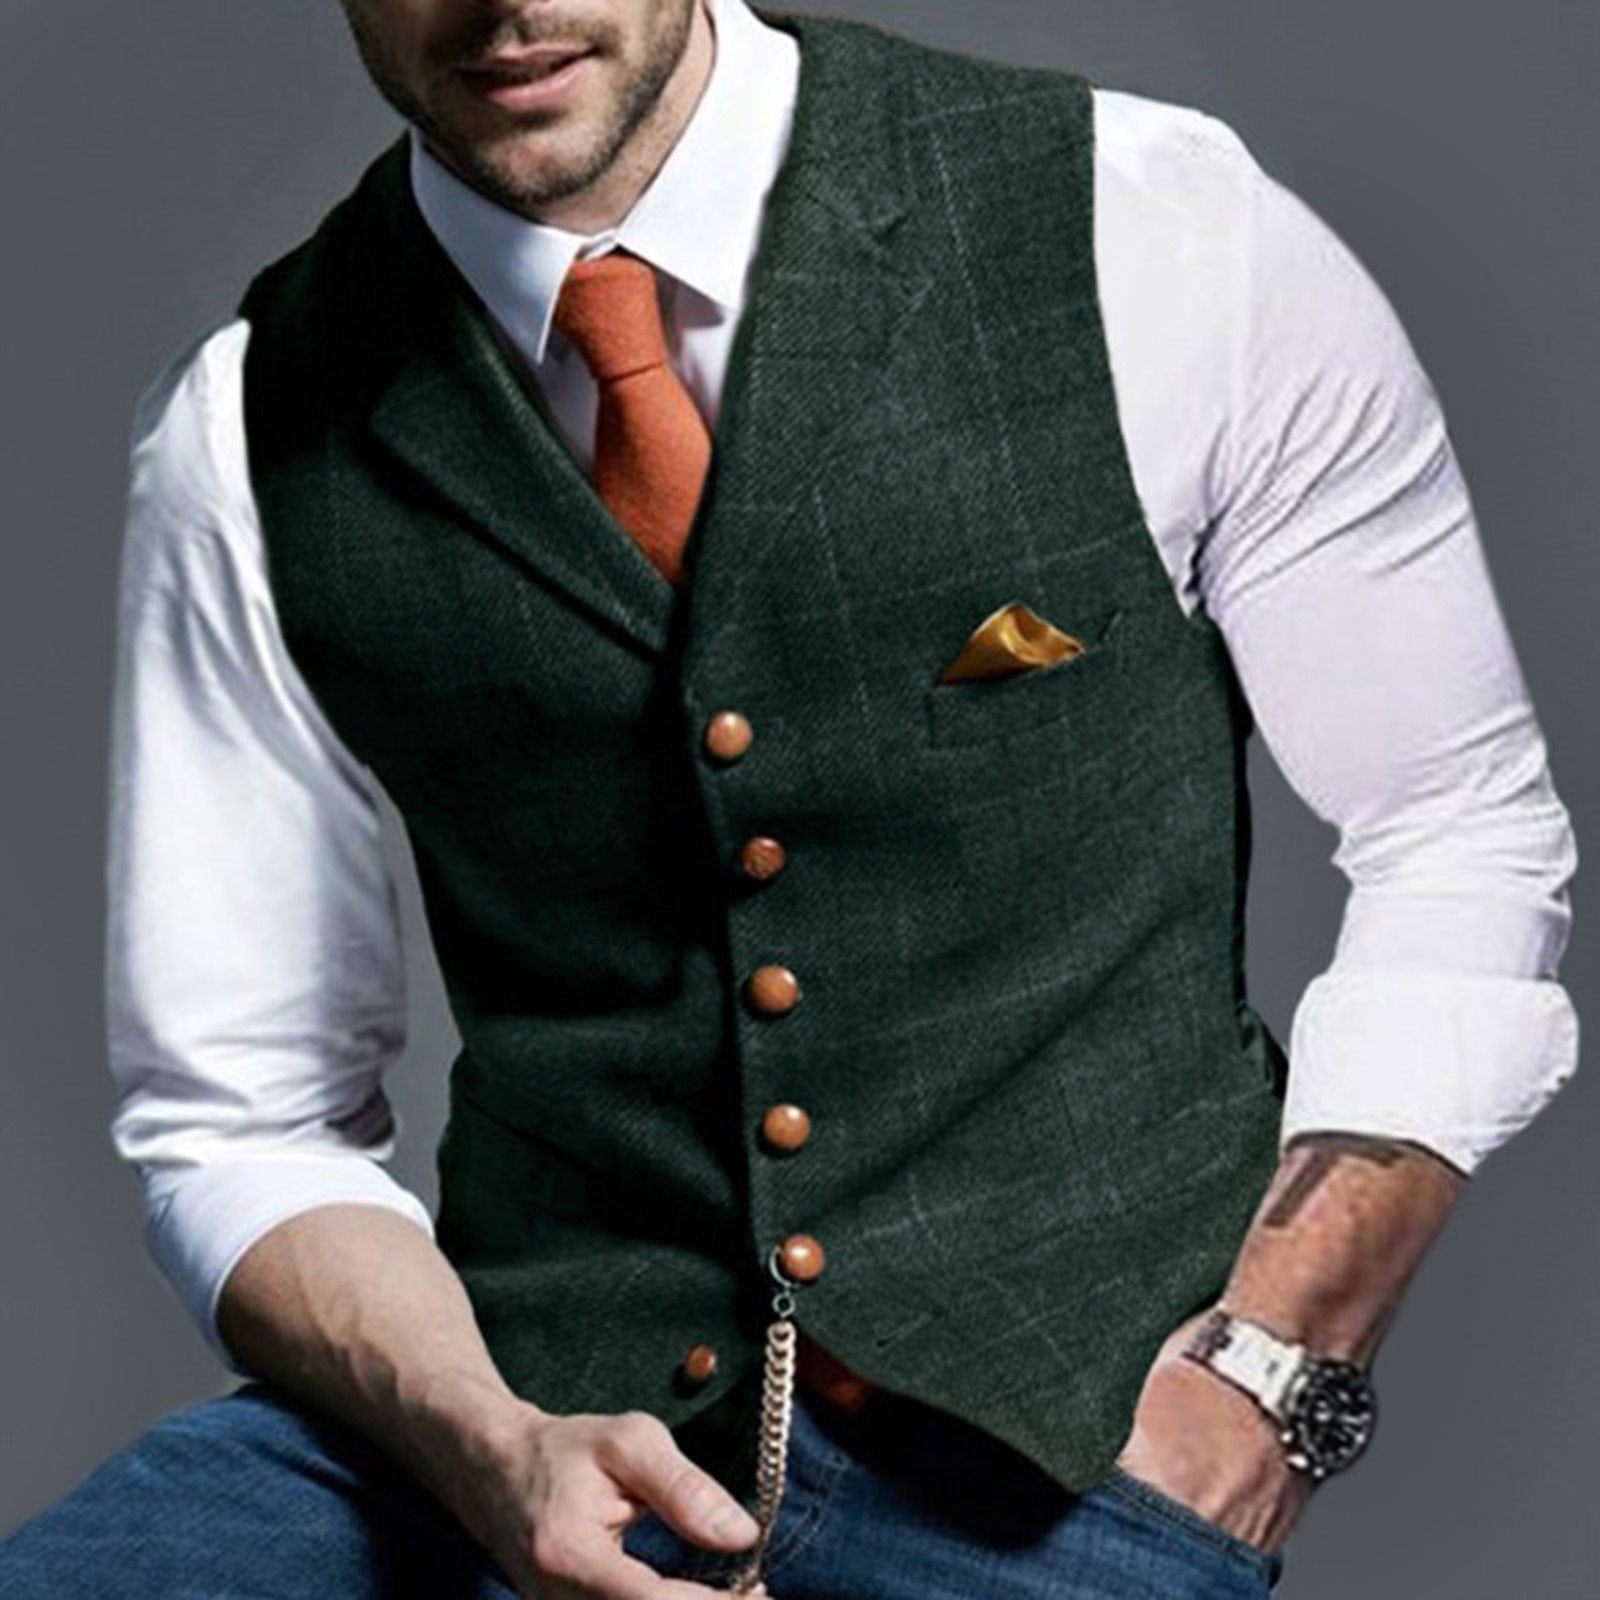 Men Criss Cross Vest Dress at best price in Chennai by Gats By